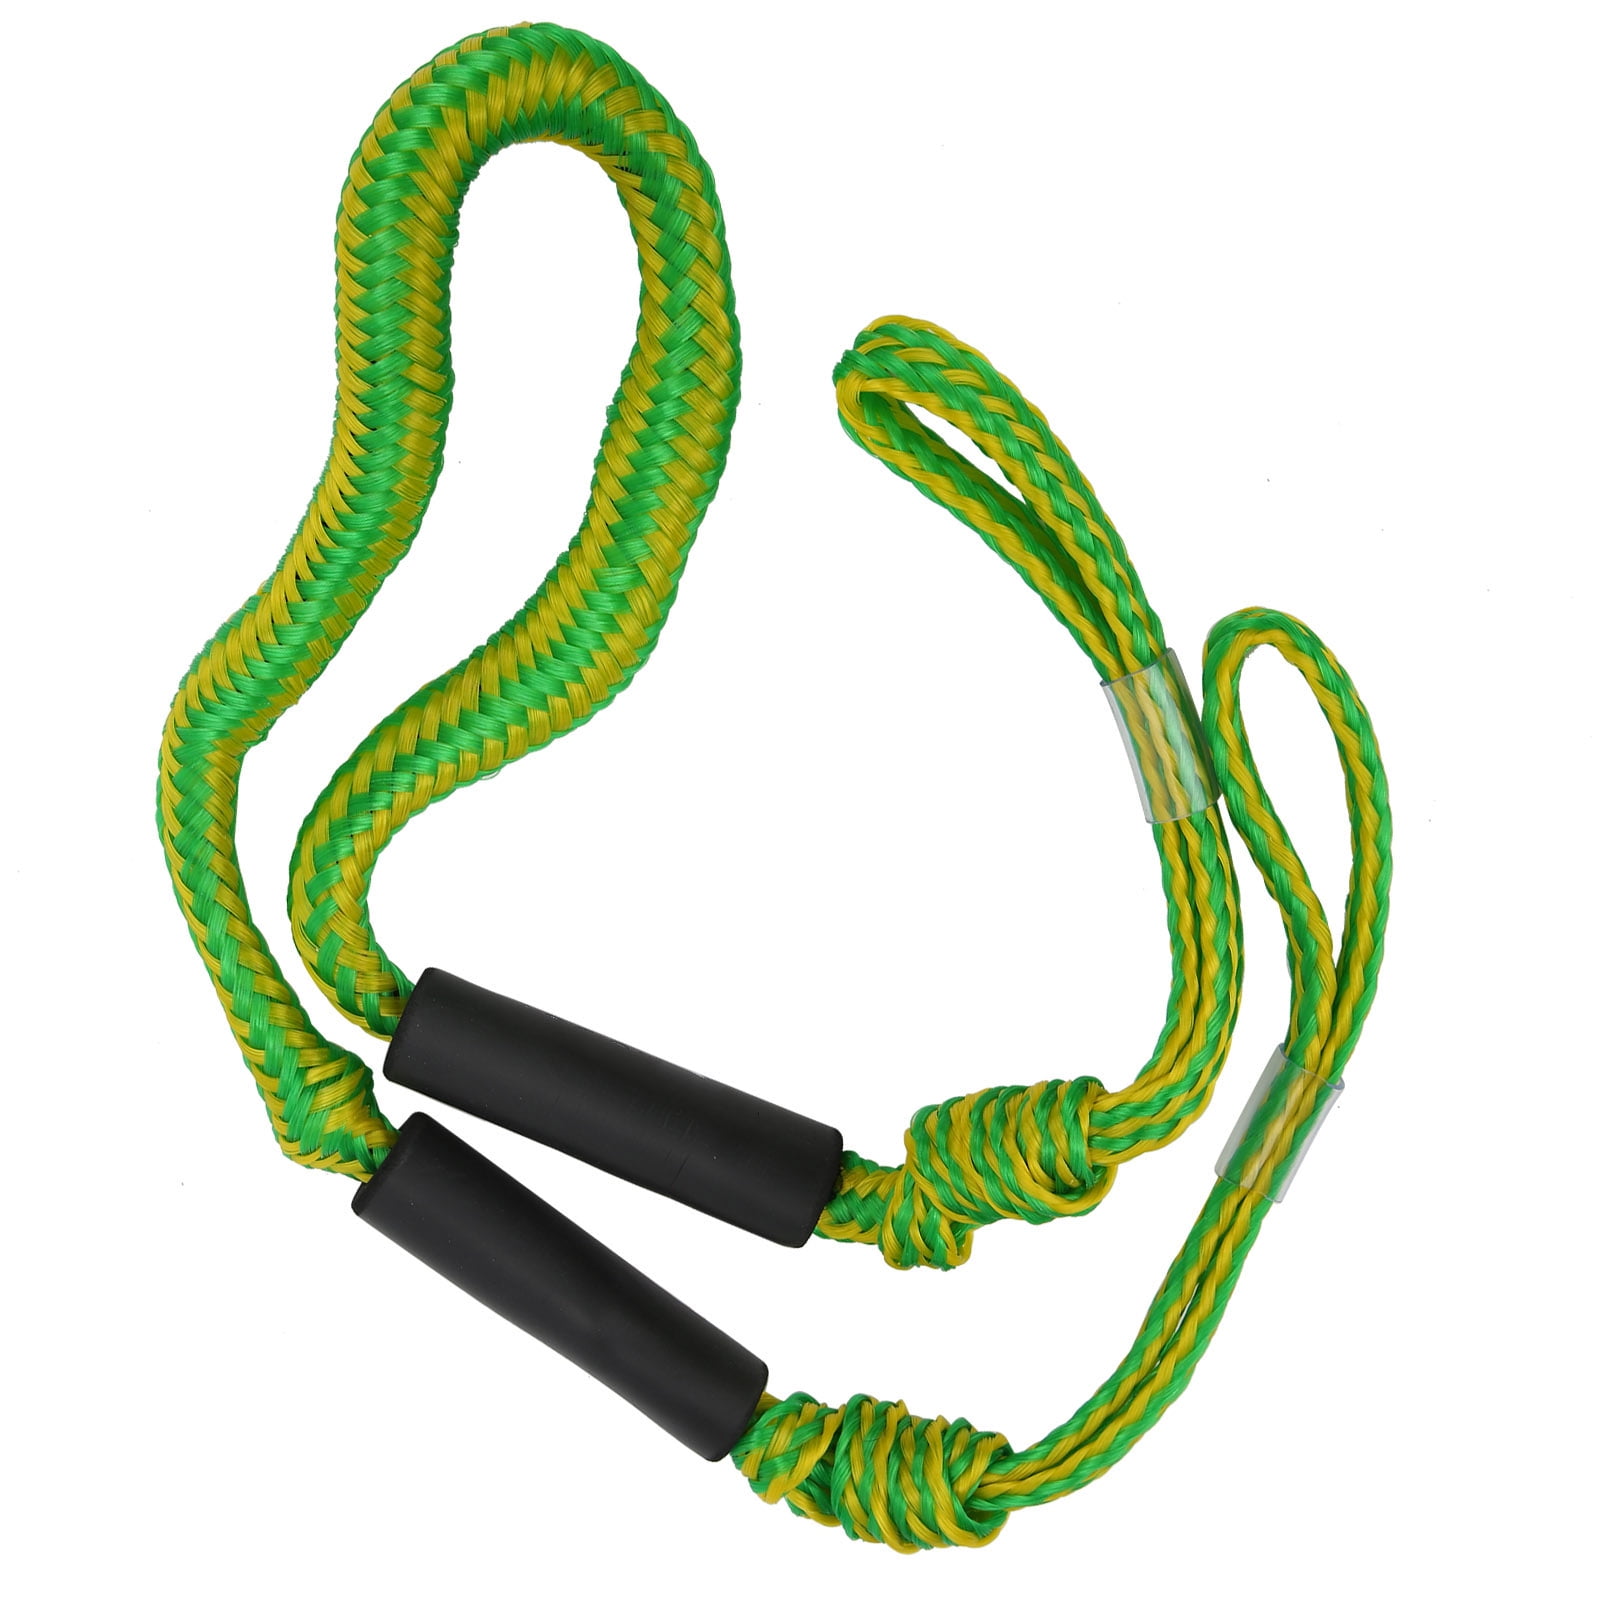 Details about   126cm Elastic Stretchable Nylon Mooring Marine Boat Bungee Rope Hiking Accessory 